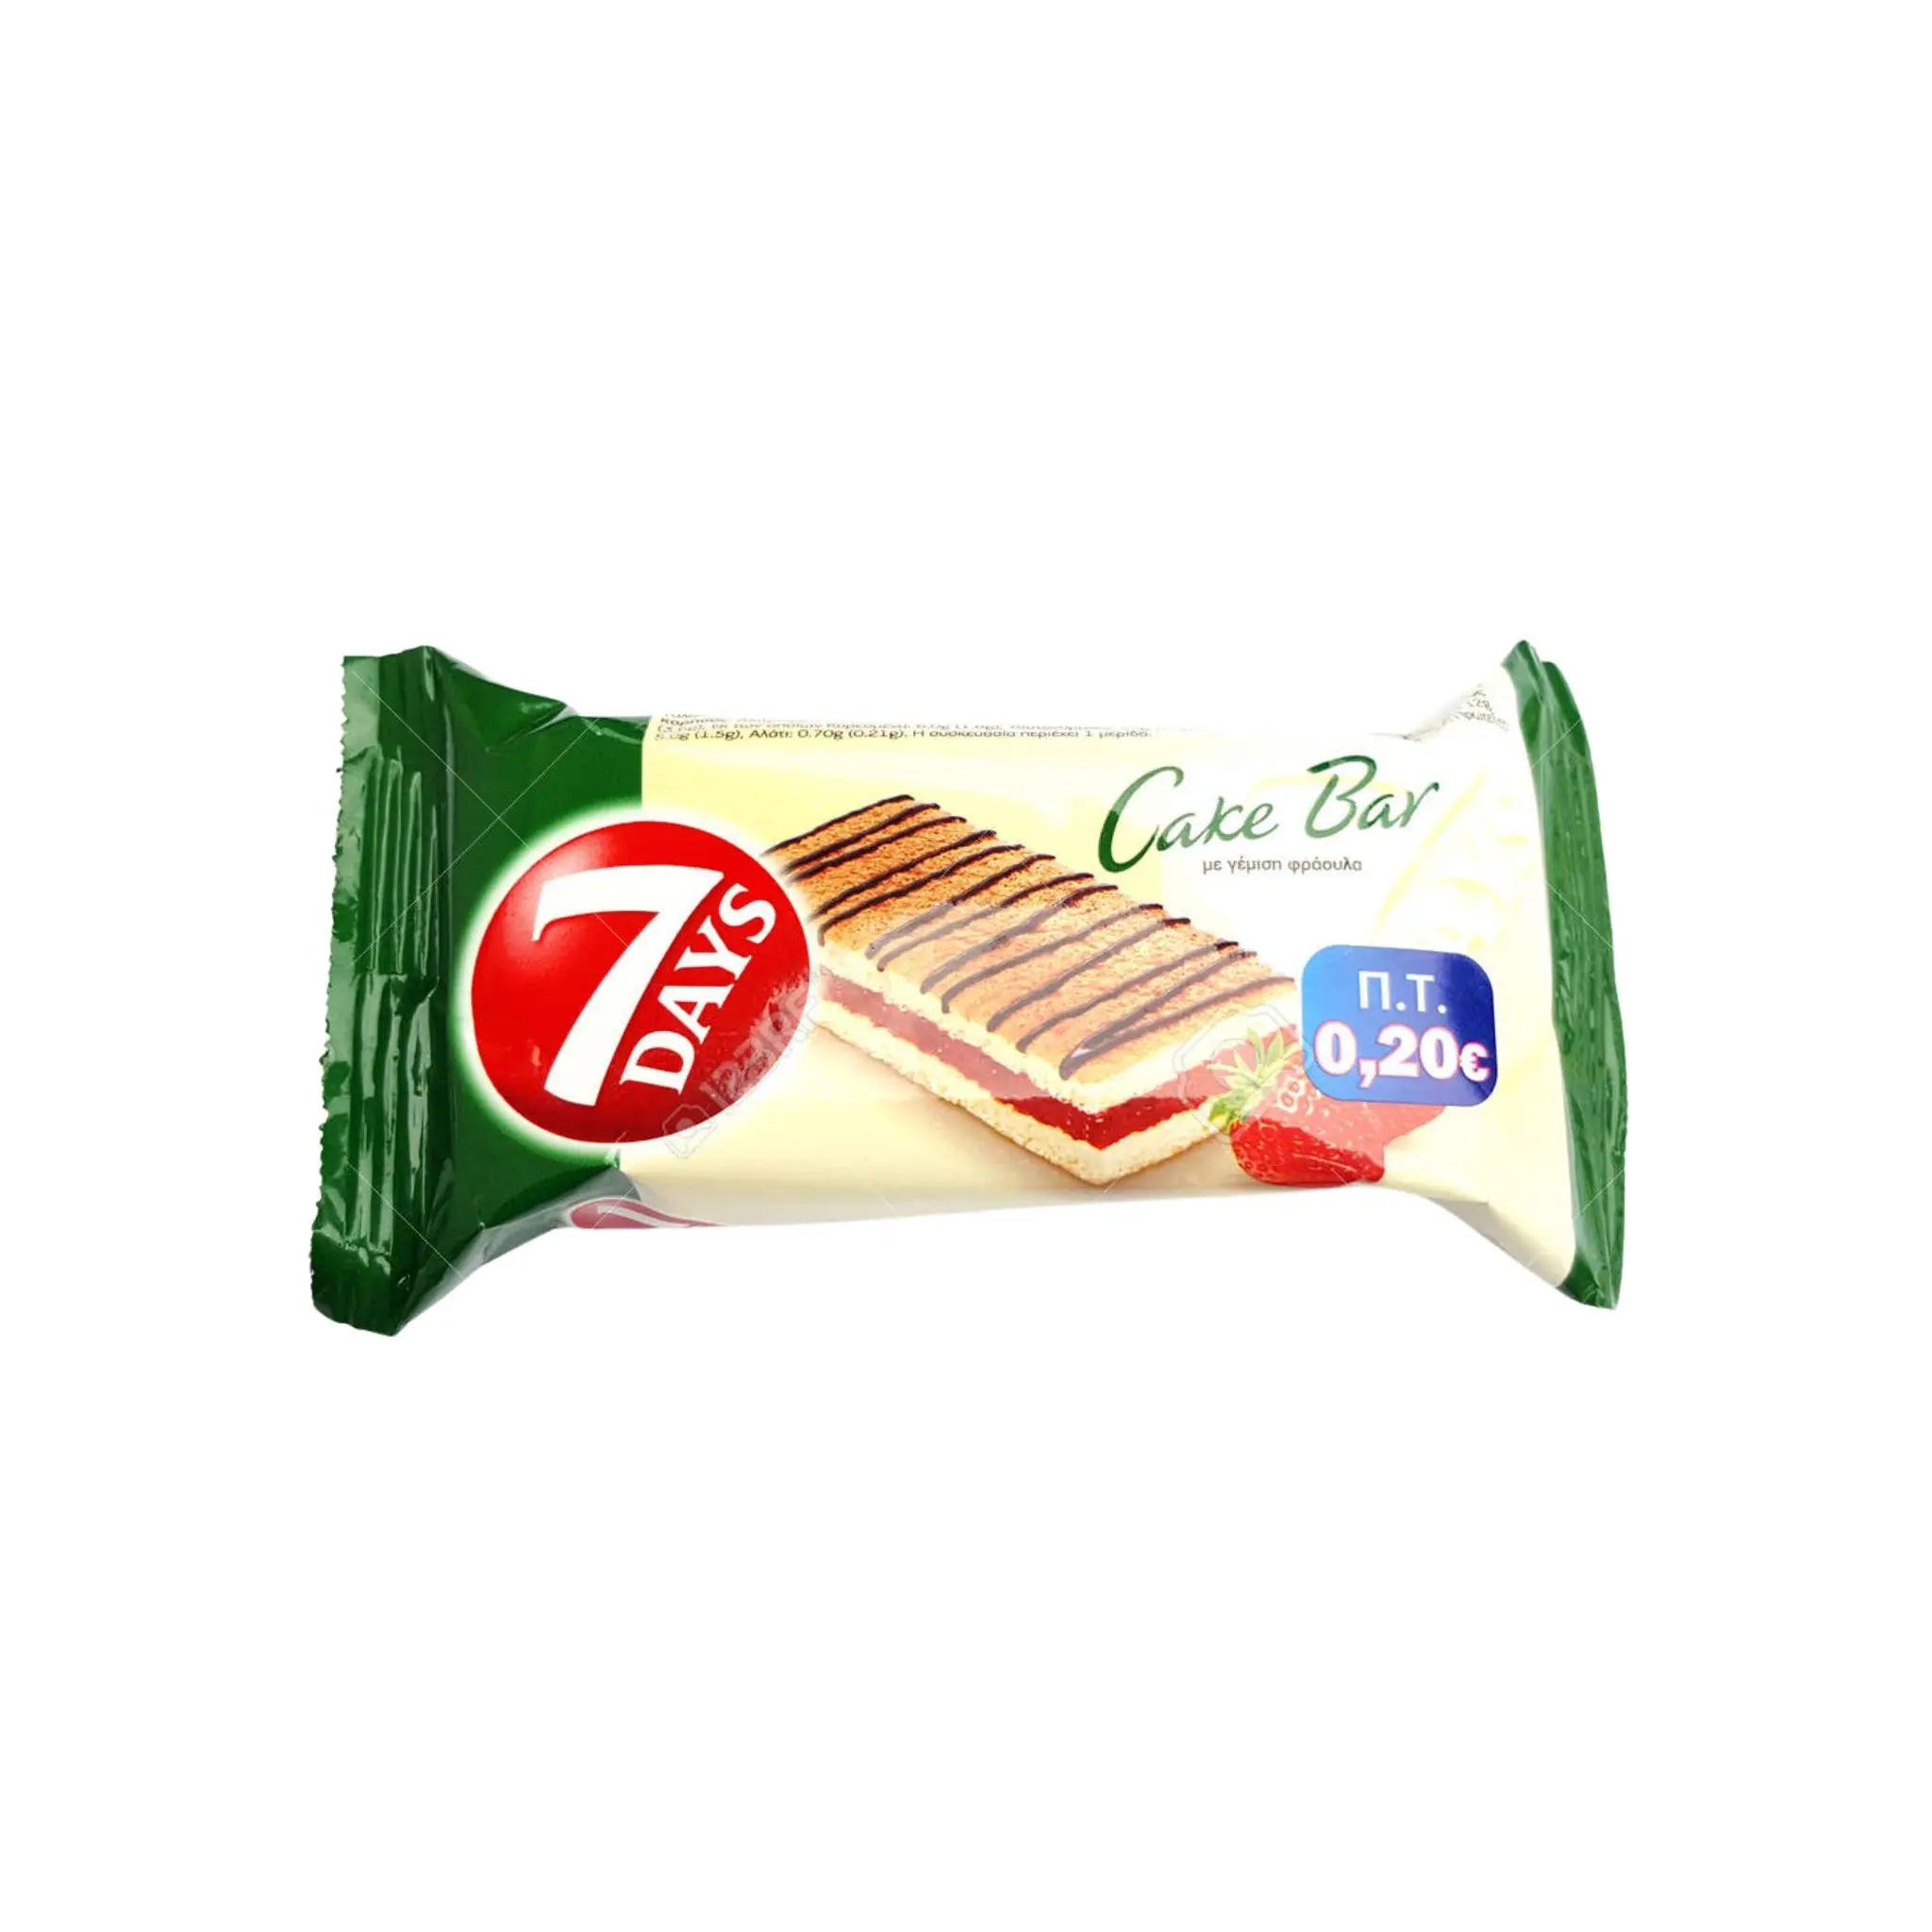 7 Days Cake Bar with Cocoa Filling with Chocolate Glaze 5 x 32 g - Tesco  Groceries